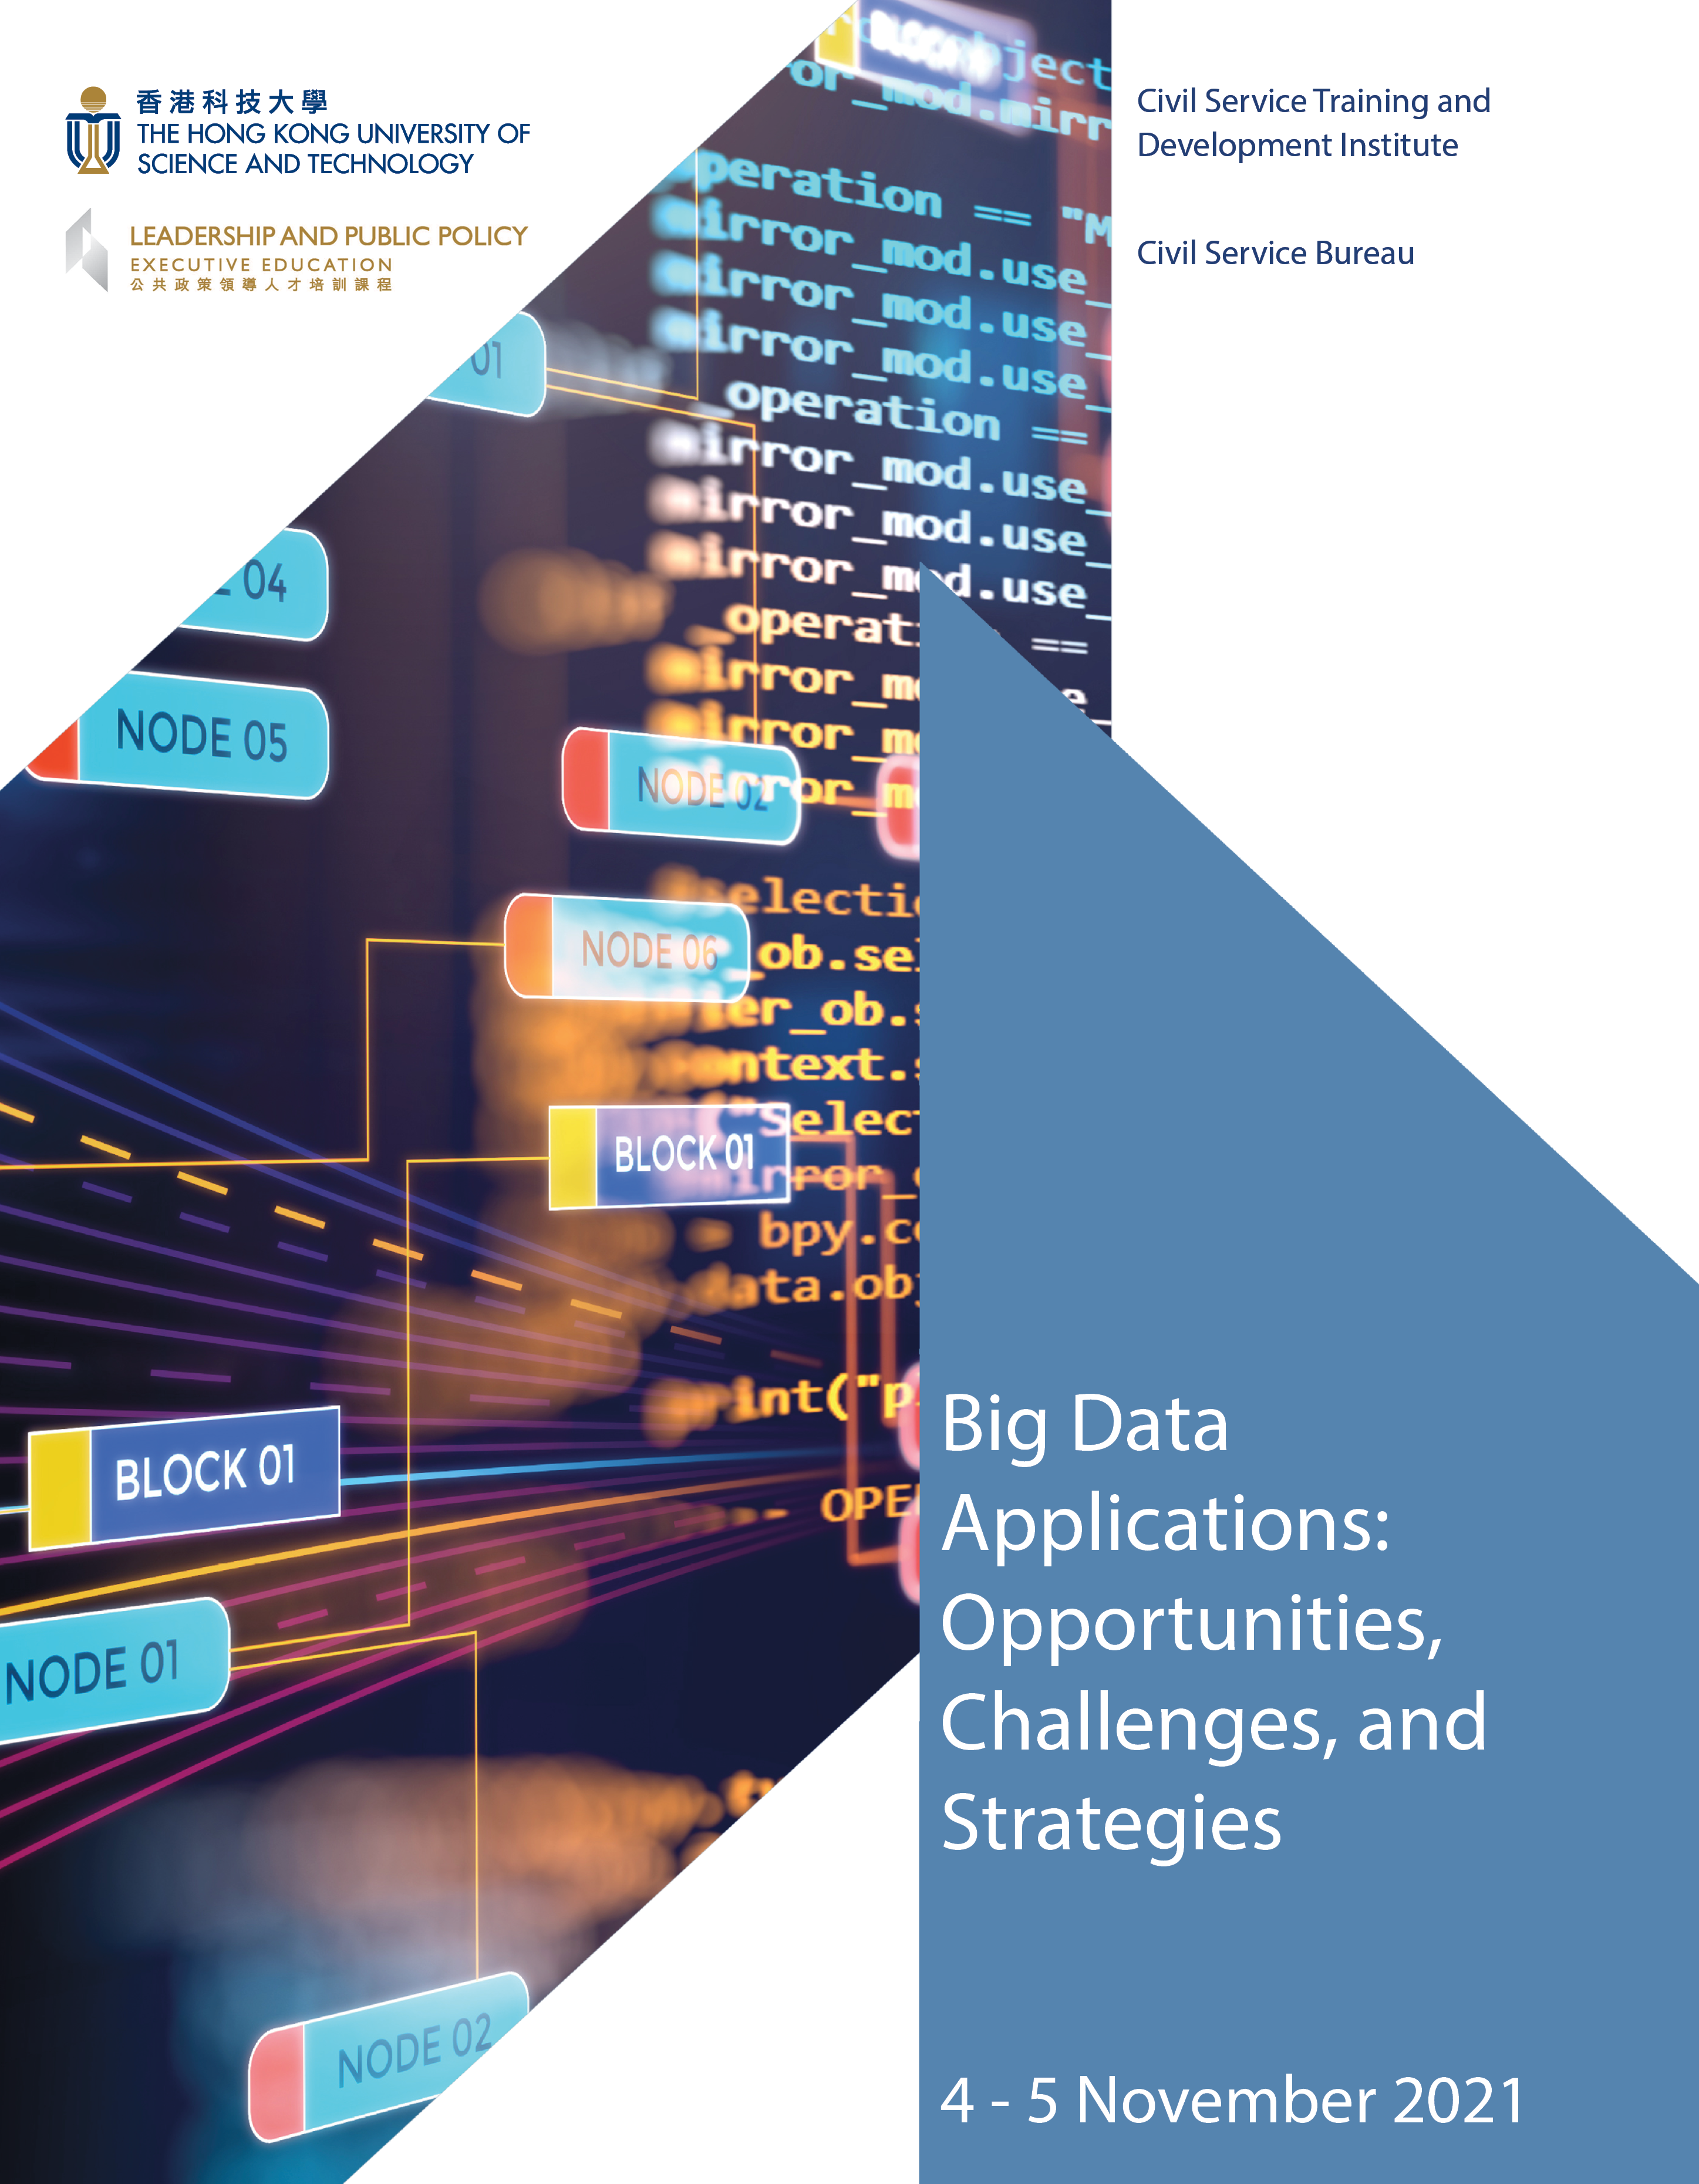 Big Data Applications: Opportunities, Challenges, and Strategies (4-5 Nov 2021)